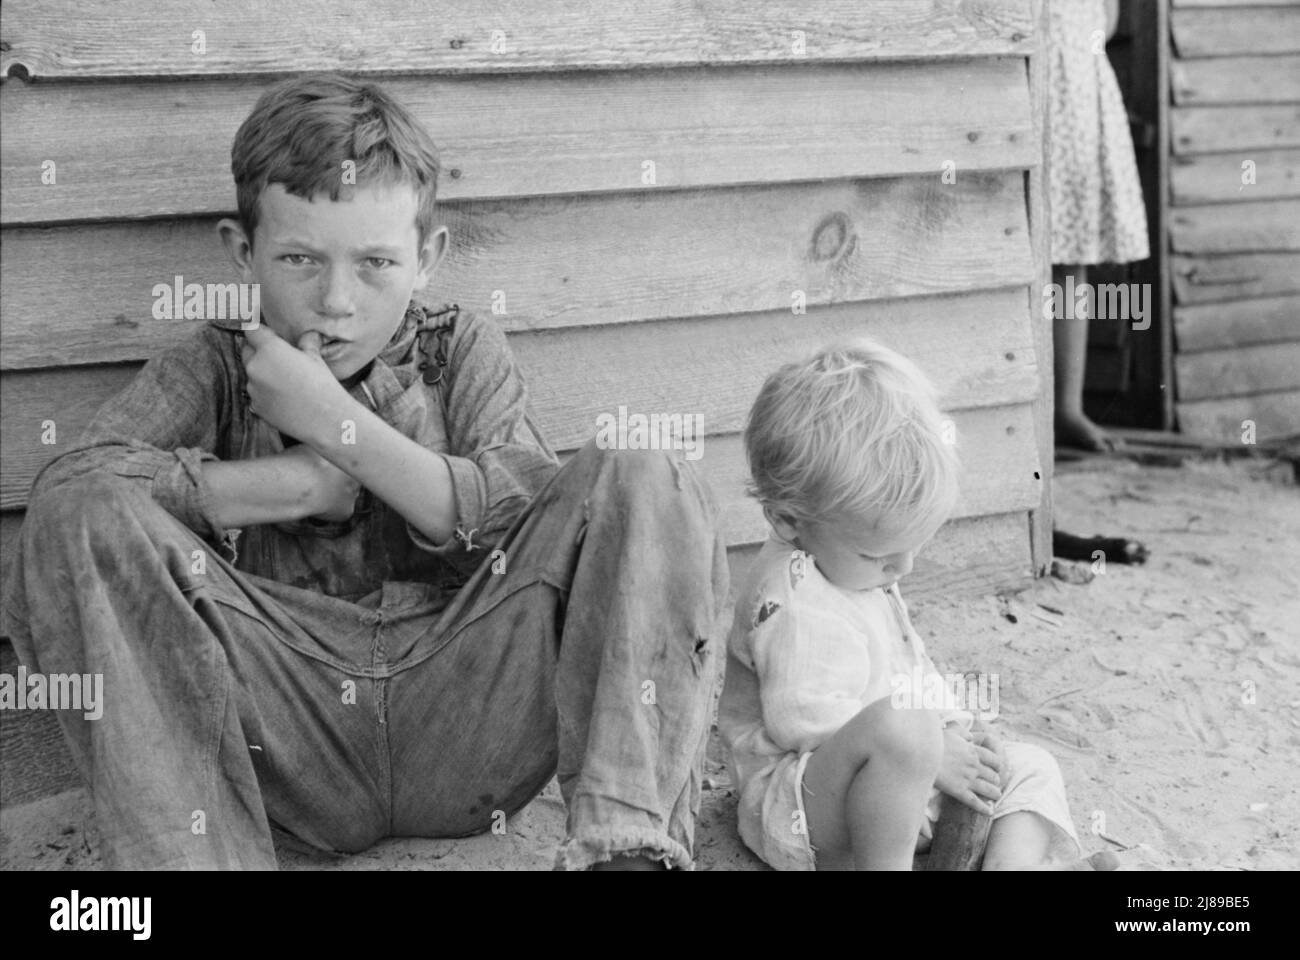 Floyd Burroughs, Jr., and Othel Lee Burroughs, called Squeakie. Children of an Alabama cotton sharecropper. Stock Photo